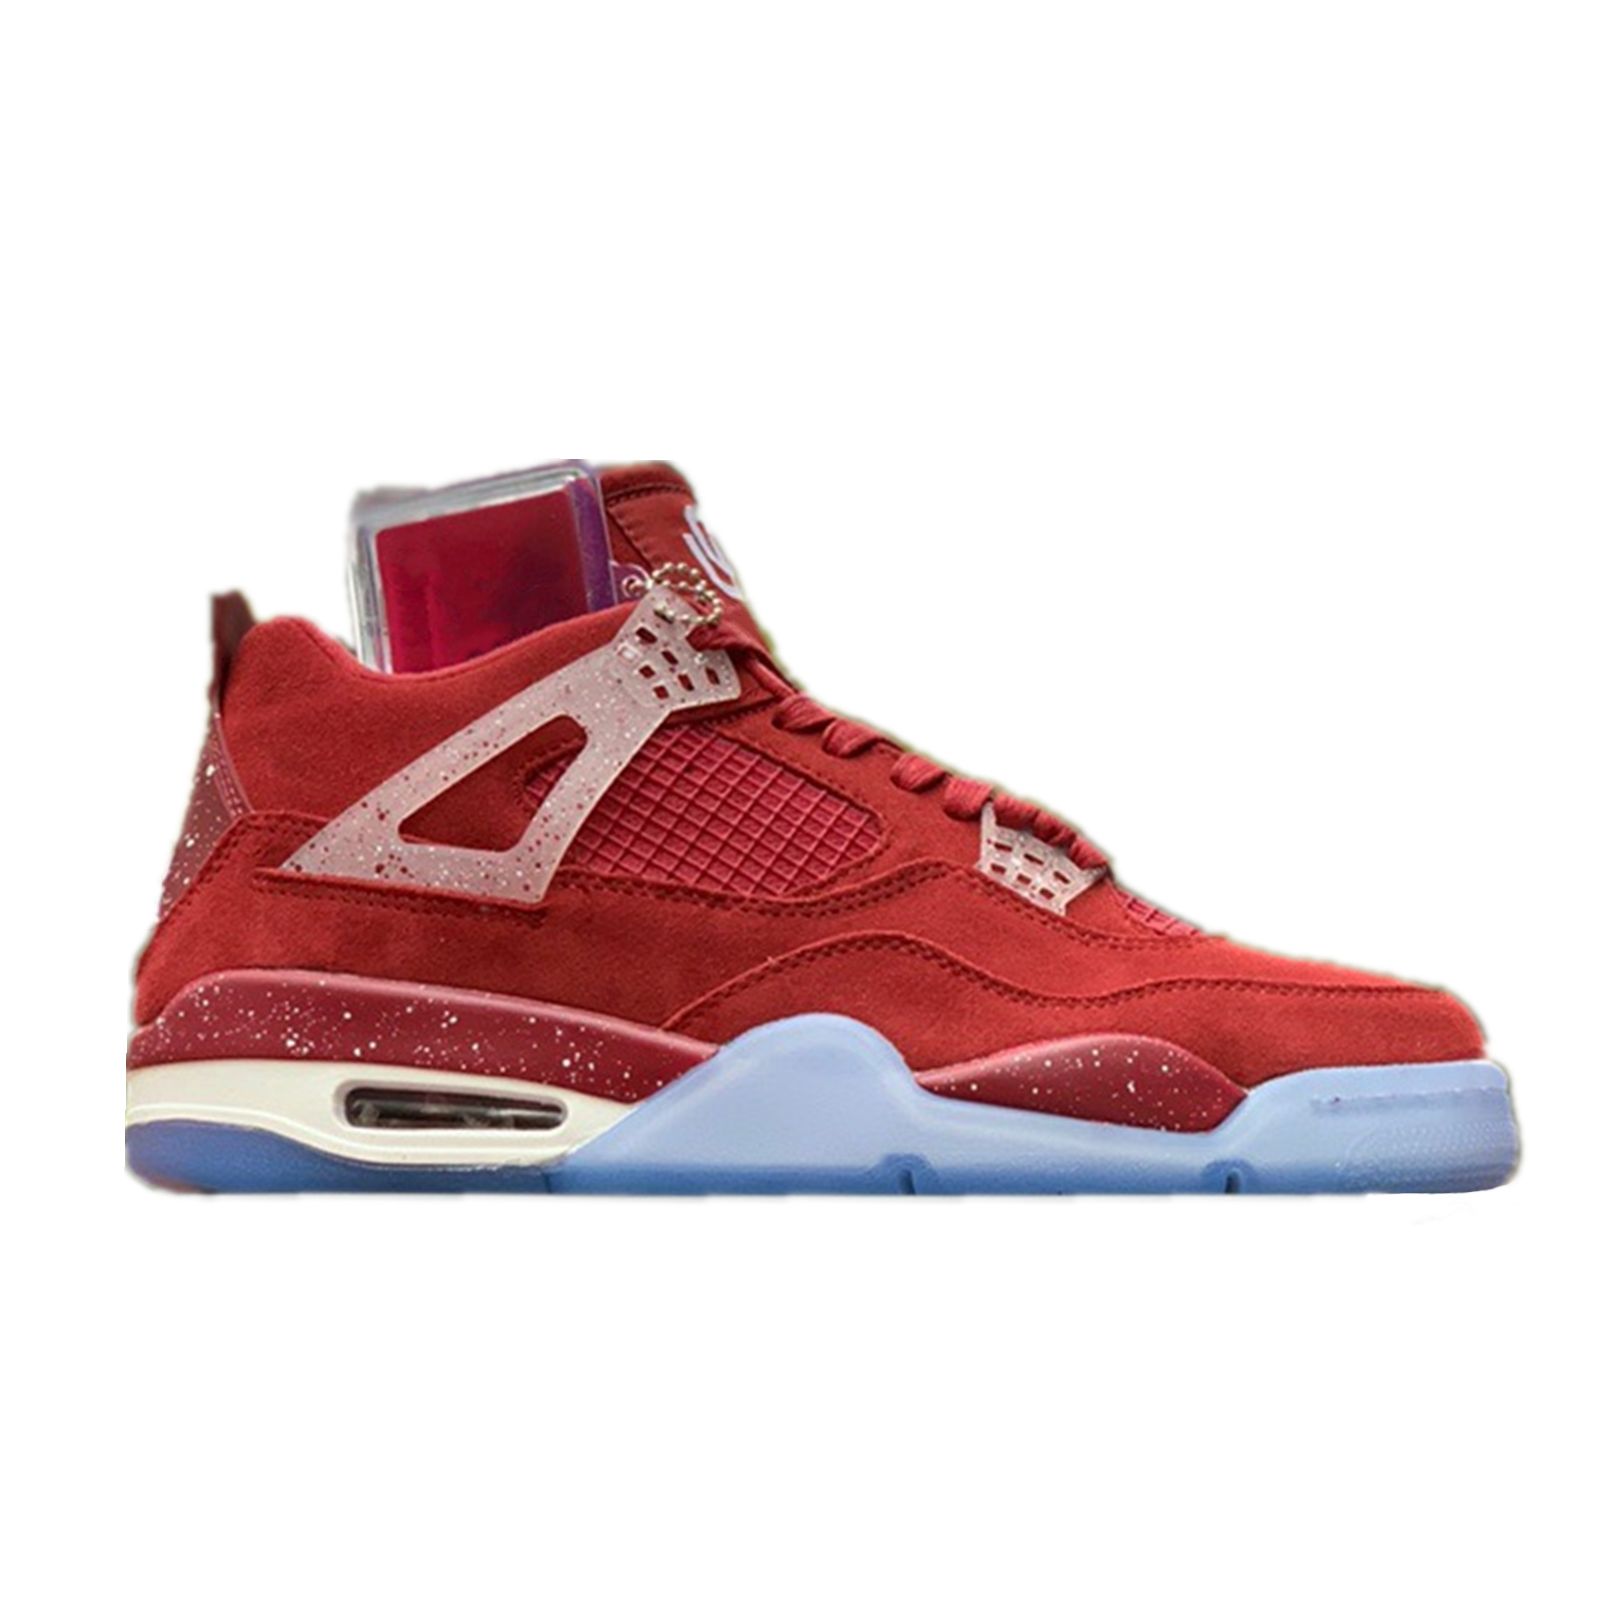 red suede 4s